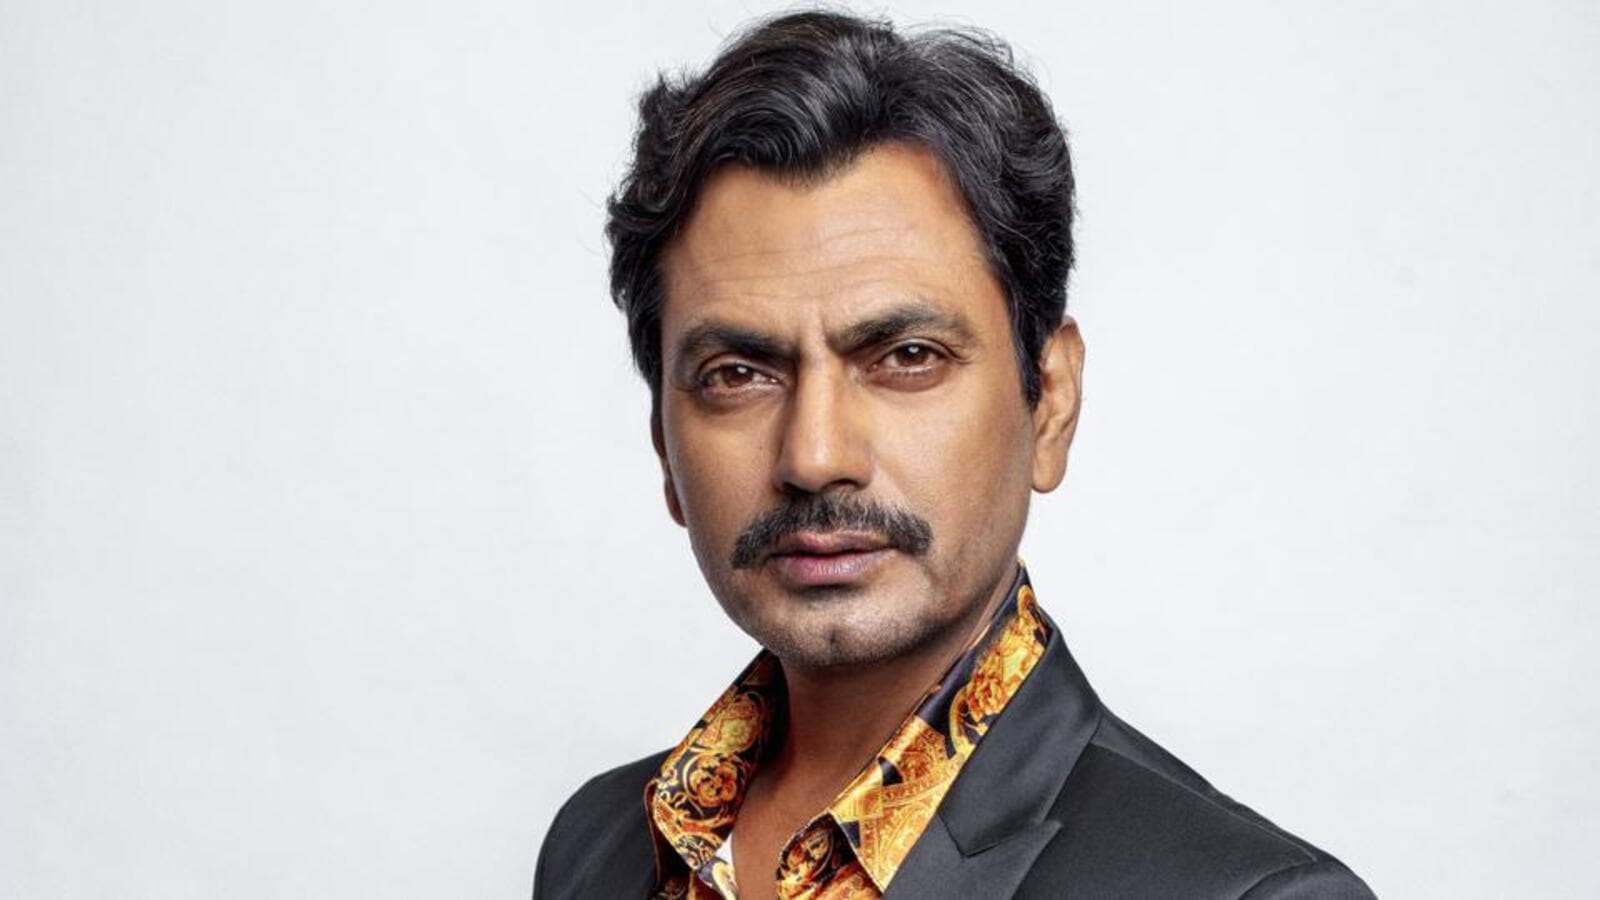 IndiaAtCannes | Nawazuddin Siddiqui: Only good cinema talked about here,  not box office collections | Bollywood - Hindustan Times